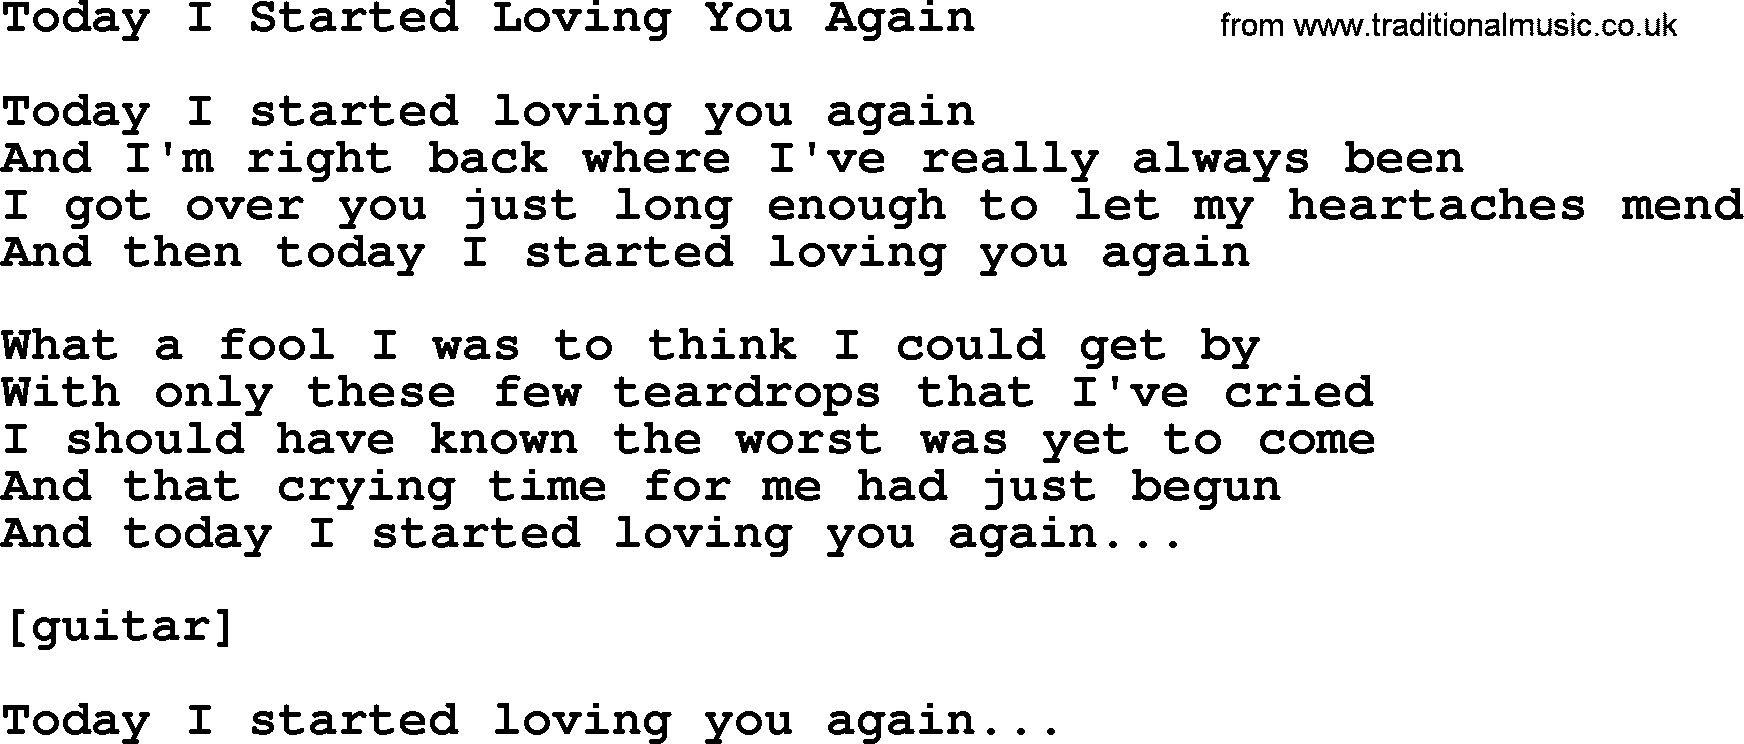 Willie Nelson song: Today I Started Loving You Again lyrics